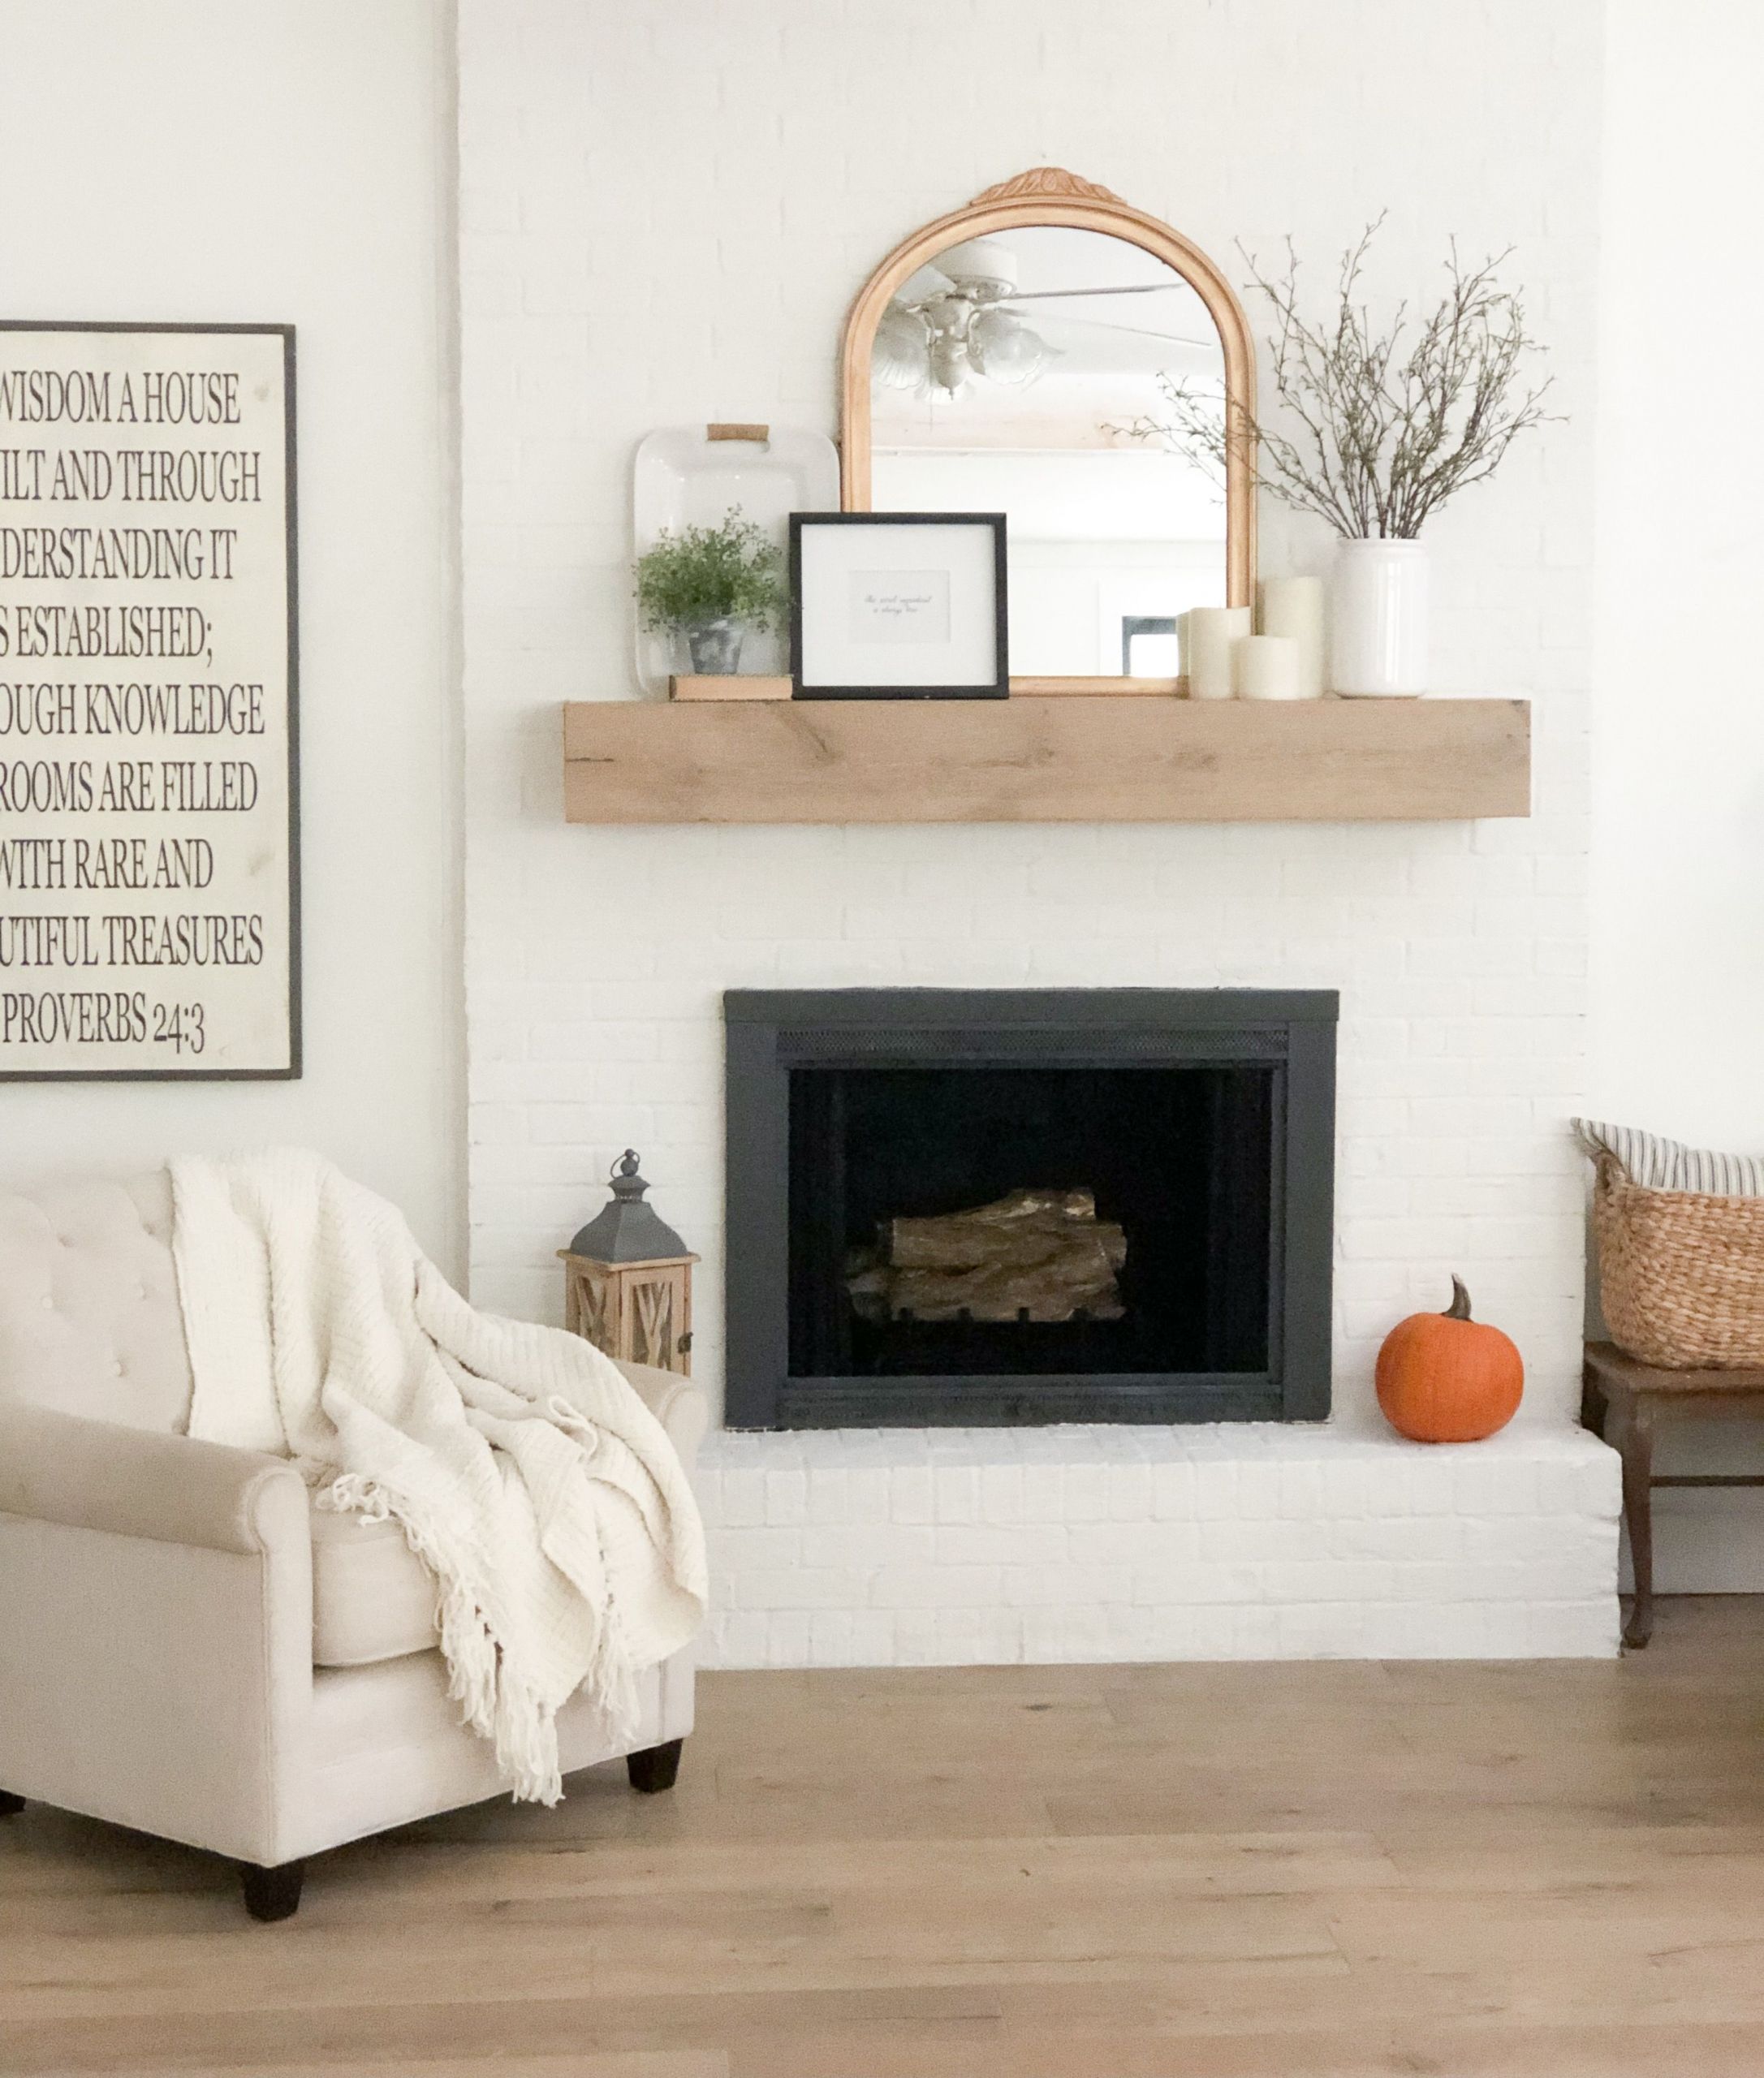 Diy Fireplace Surround Ideas Fresh Diy Mirror Makeover for Our Fireplace Mantel